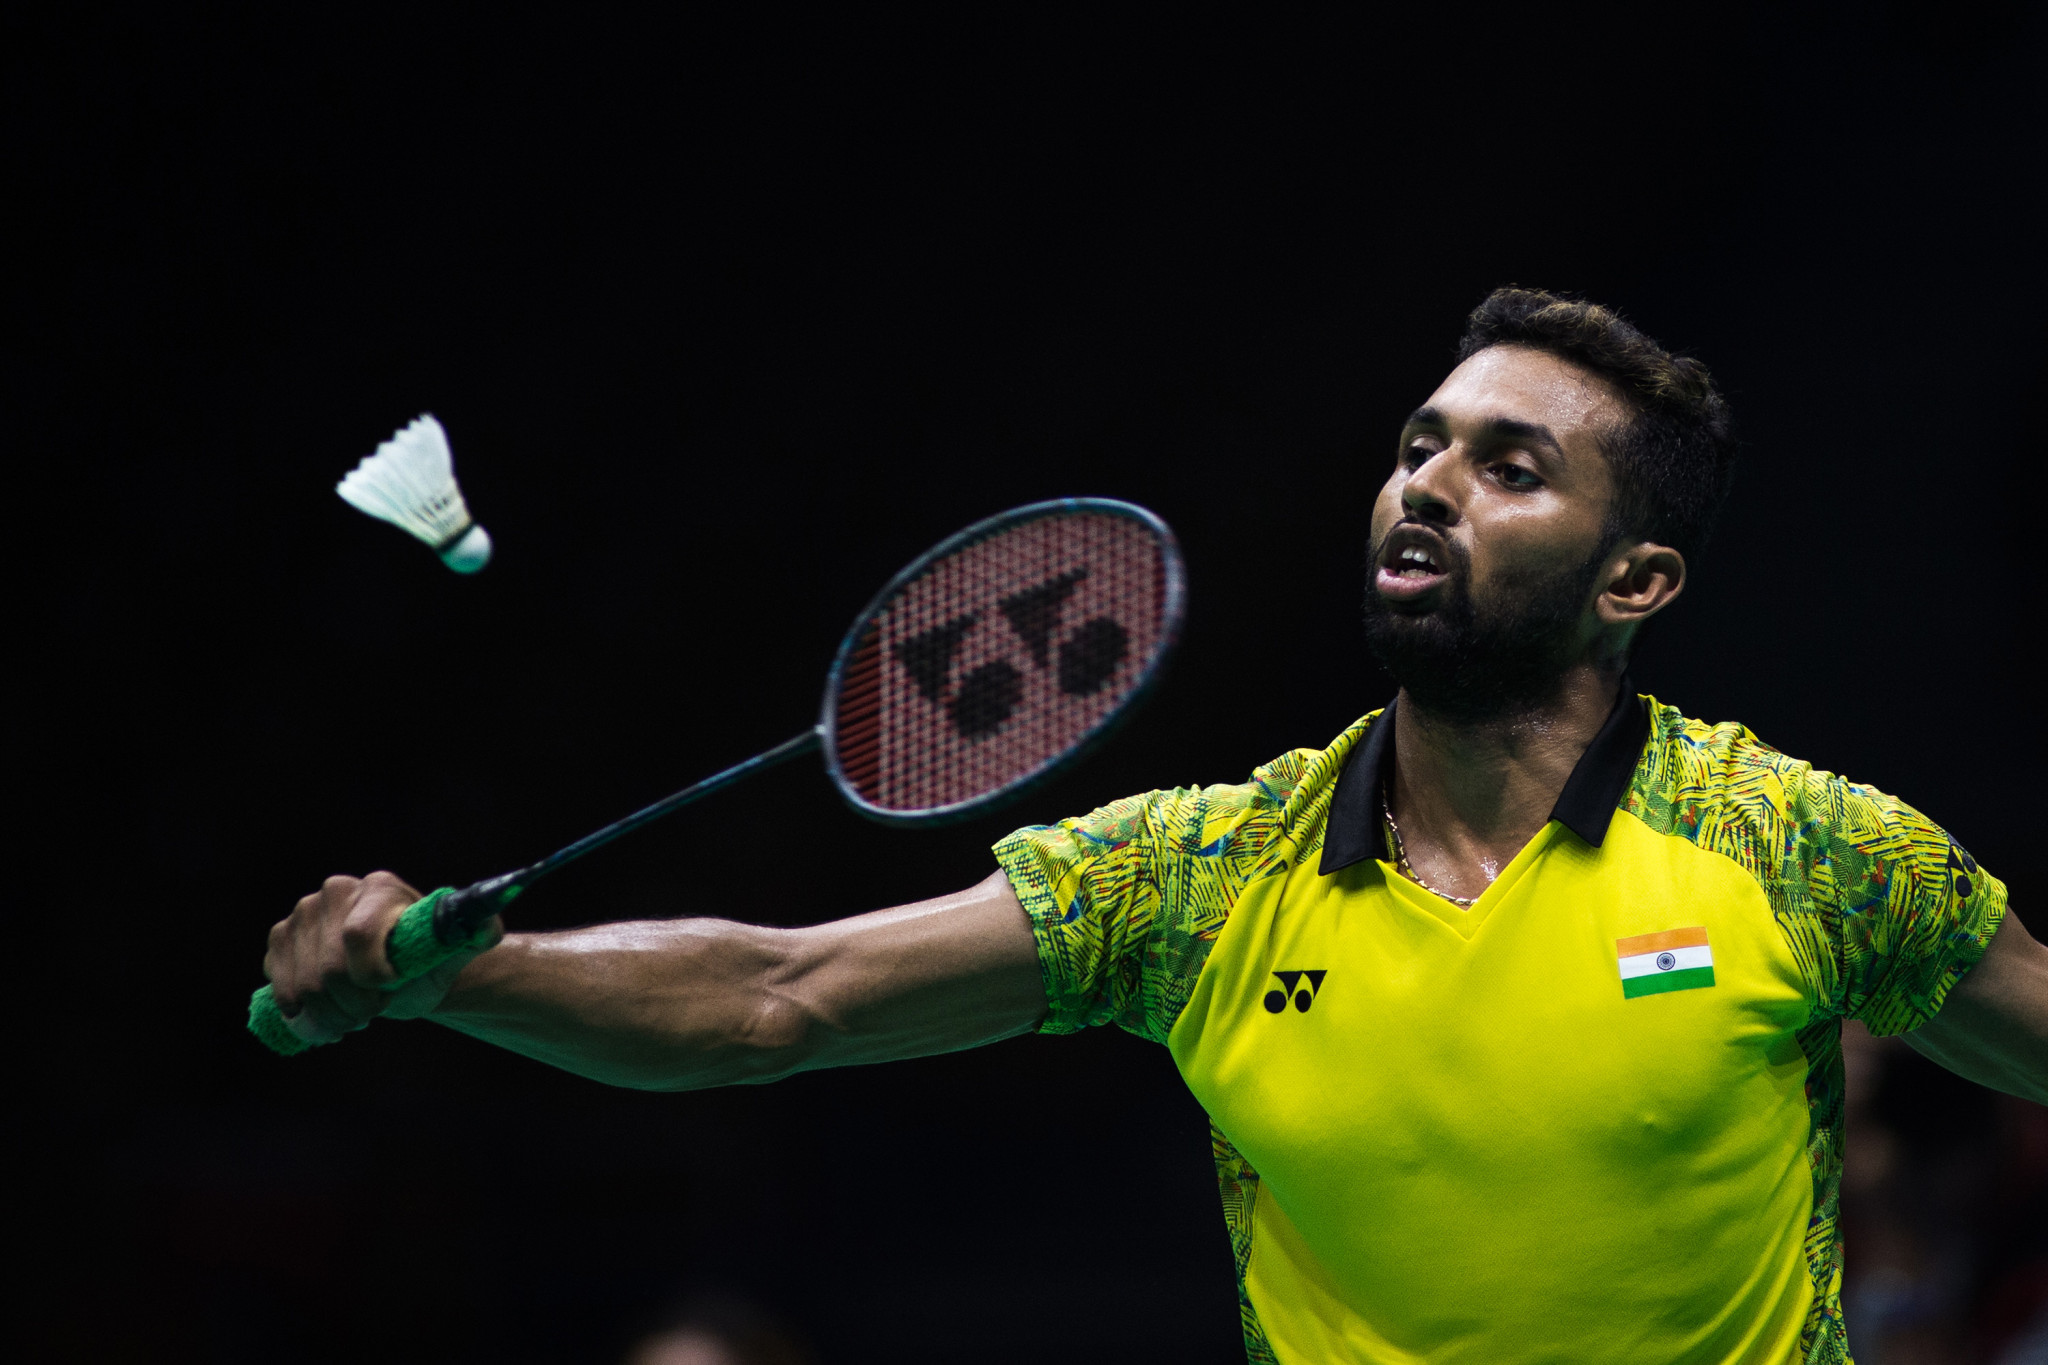 Prannoy Kumar, the top seed in the men's tournament, has also pulled out of the event in Sydney ©Getty Images